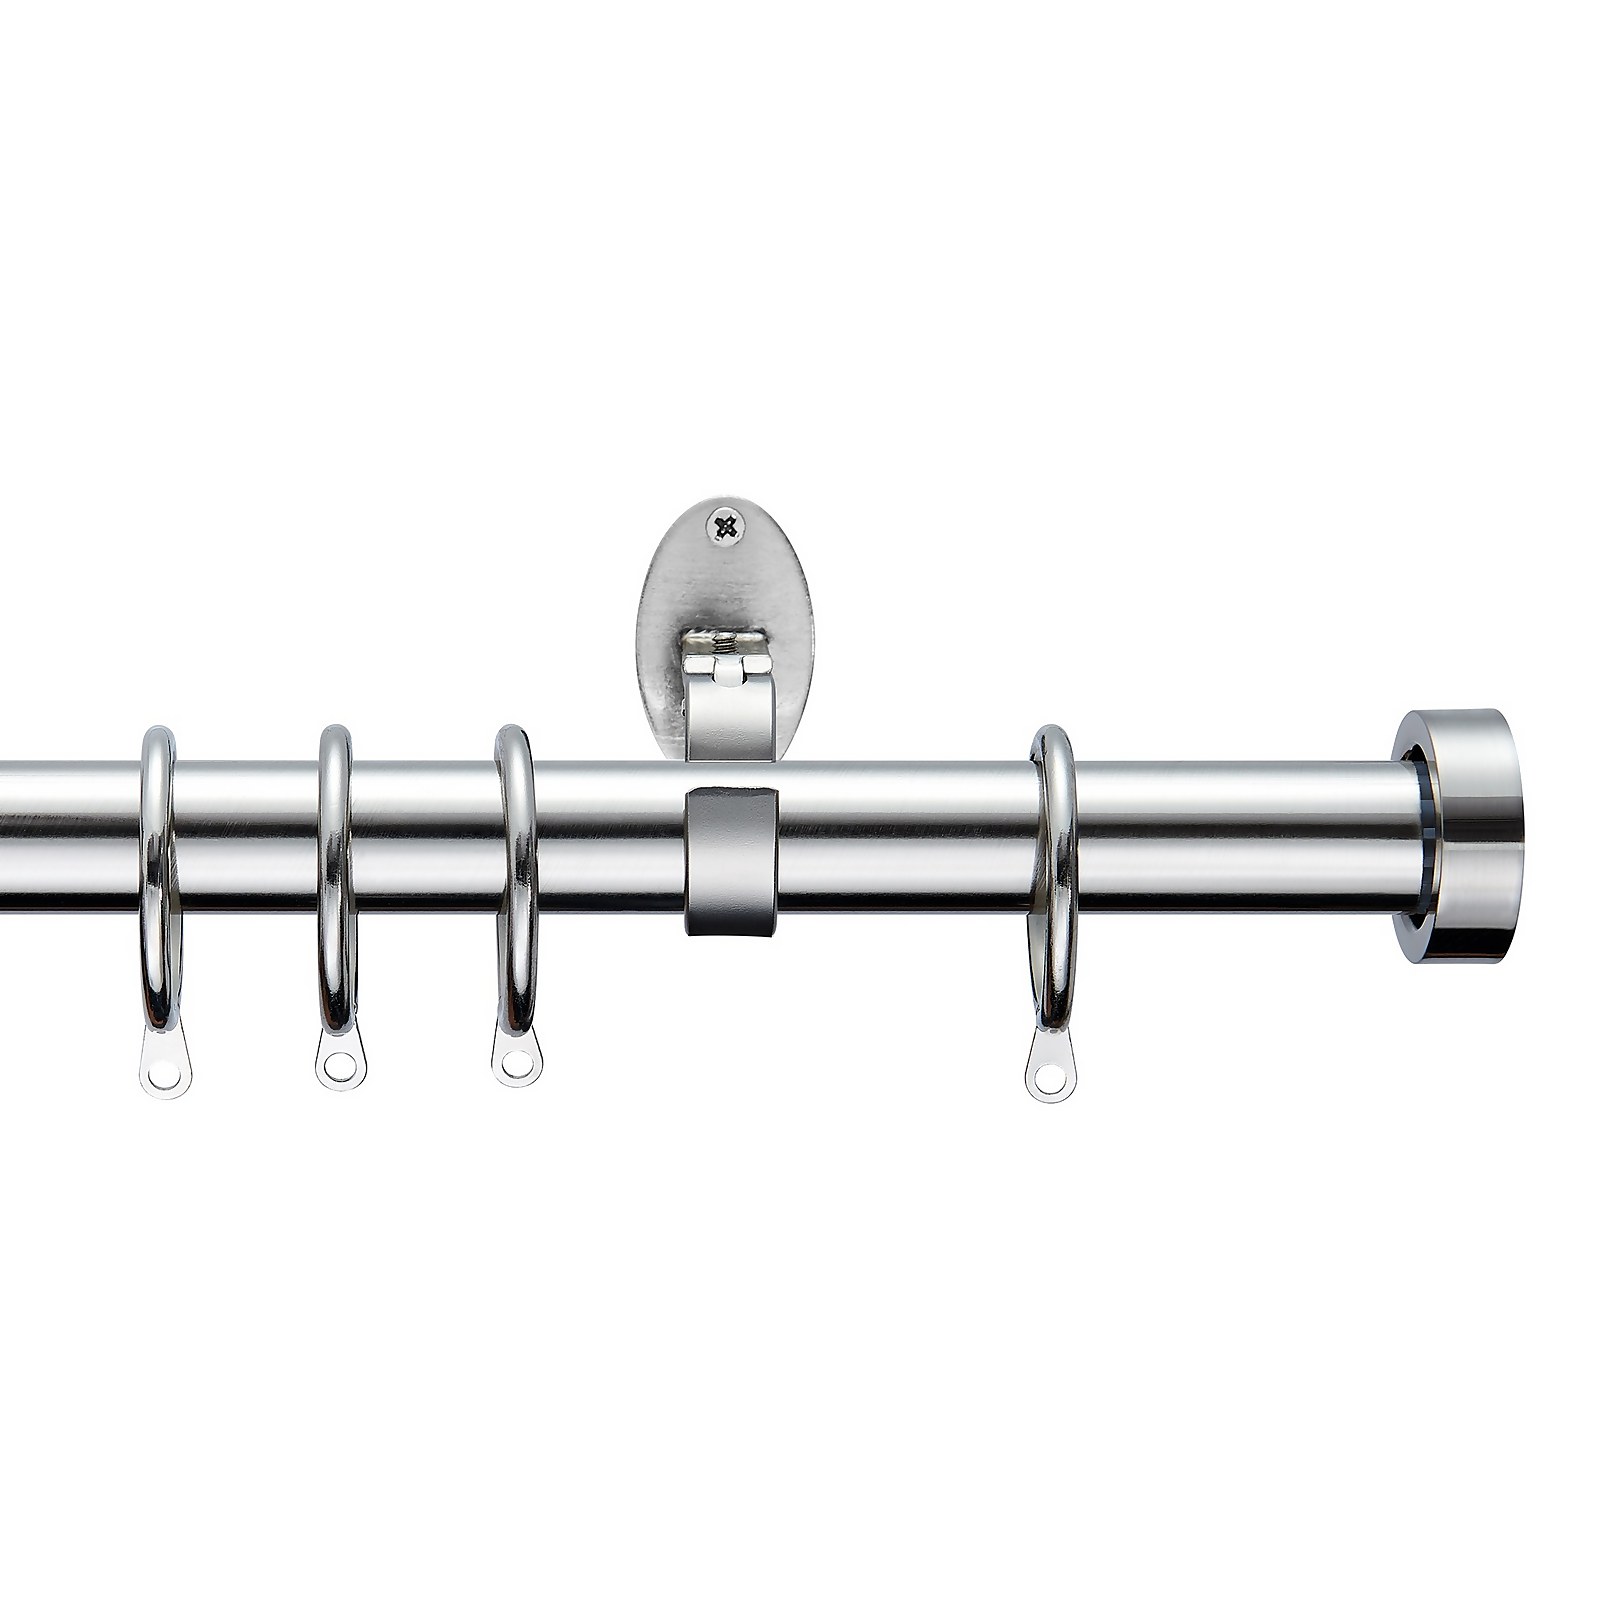 Photo of Extendable Curtain Pole With Crystal Finial - Steel